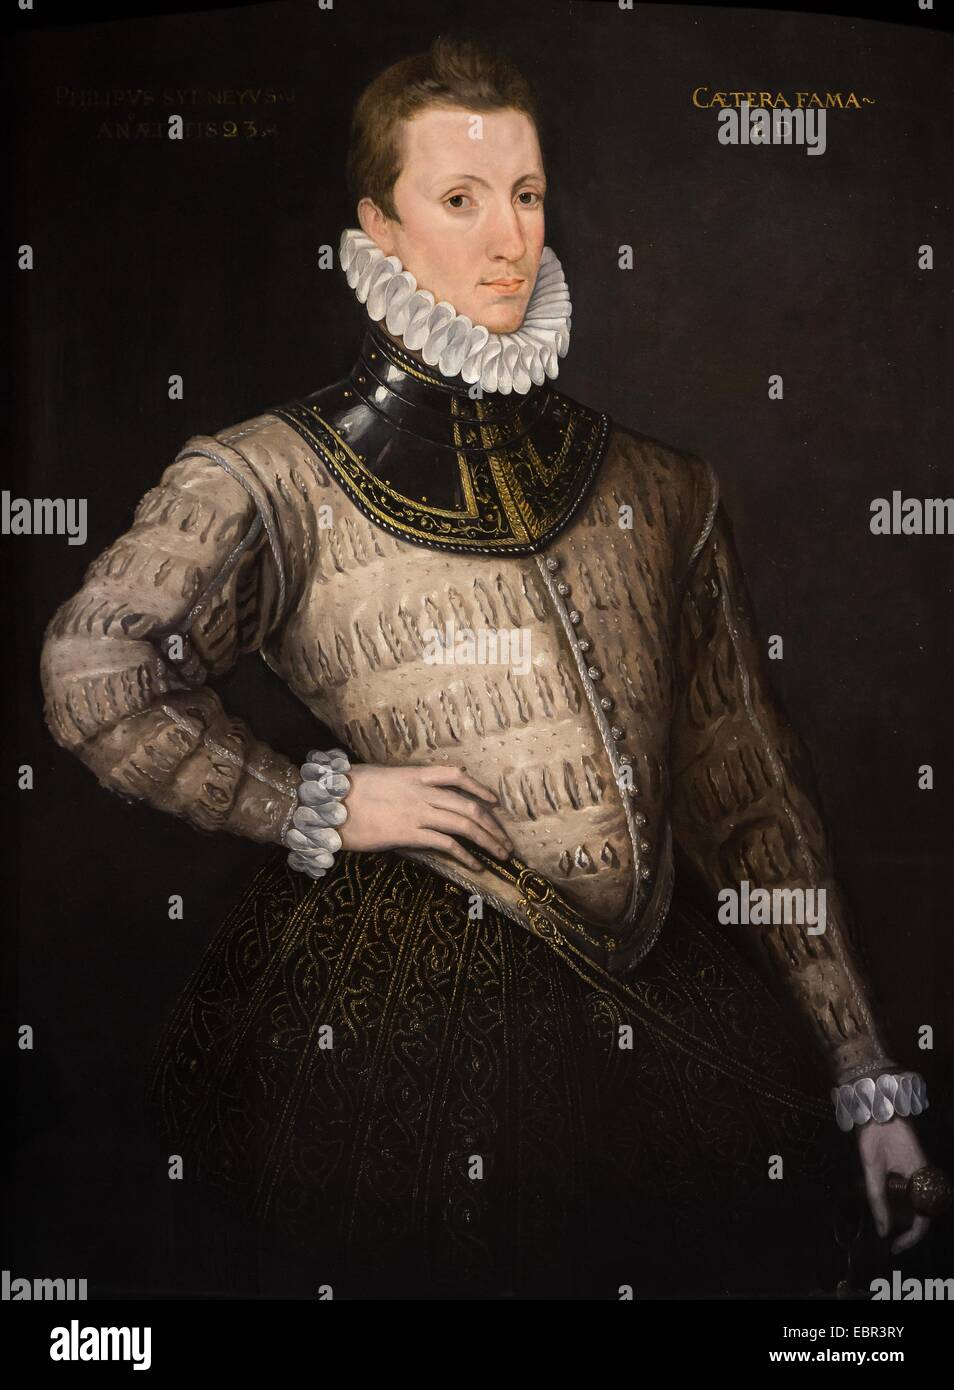 ActiveMuseum 0003639.jpg / Sir Philip Sidney, soldier, diplomat and author, 1576 - unknown artist 22/01/2014  -   / 16th century Collection / Active Museum Stock Photo